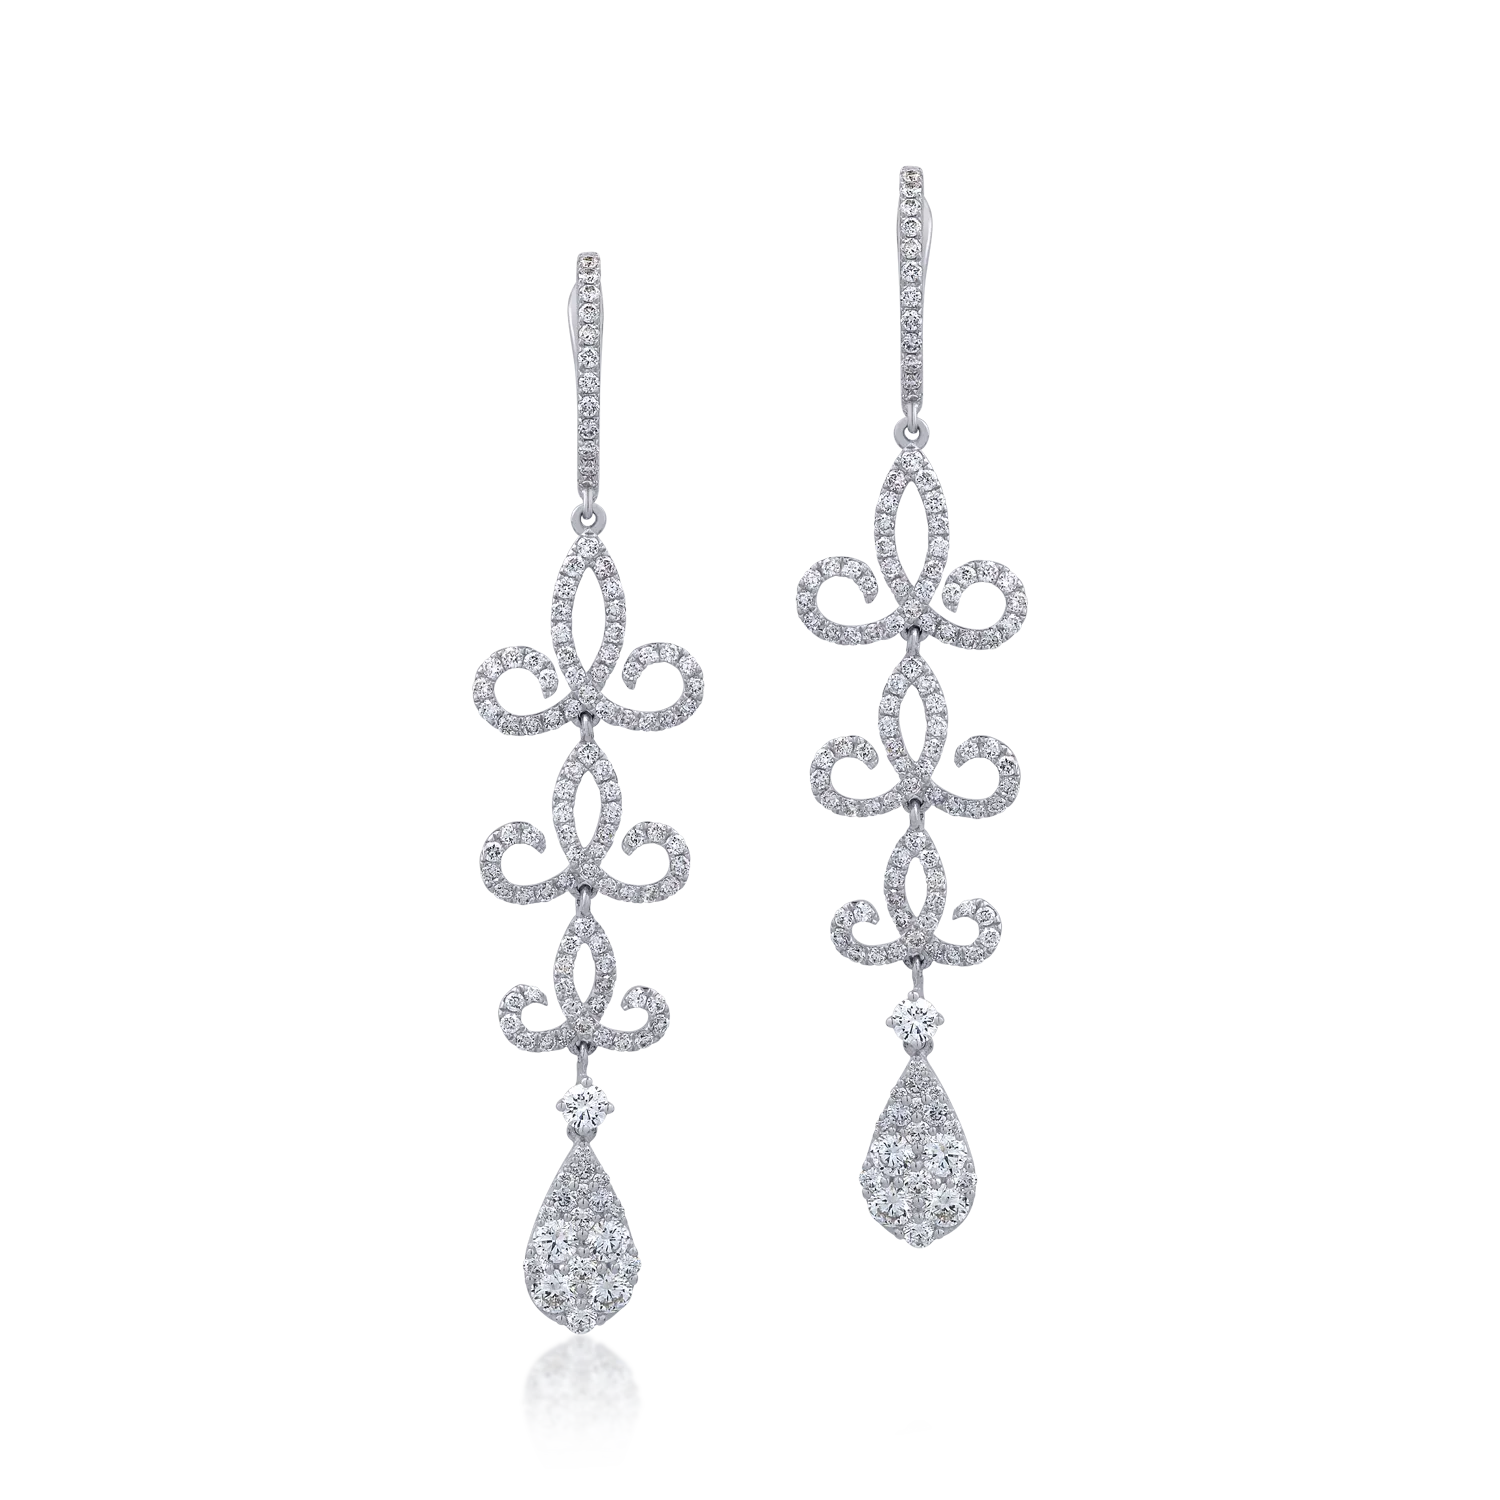 18K white gold earrings with 2.61ct diamonds